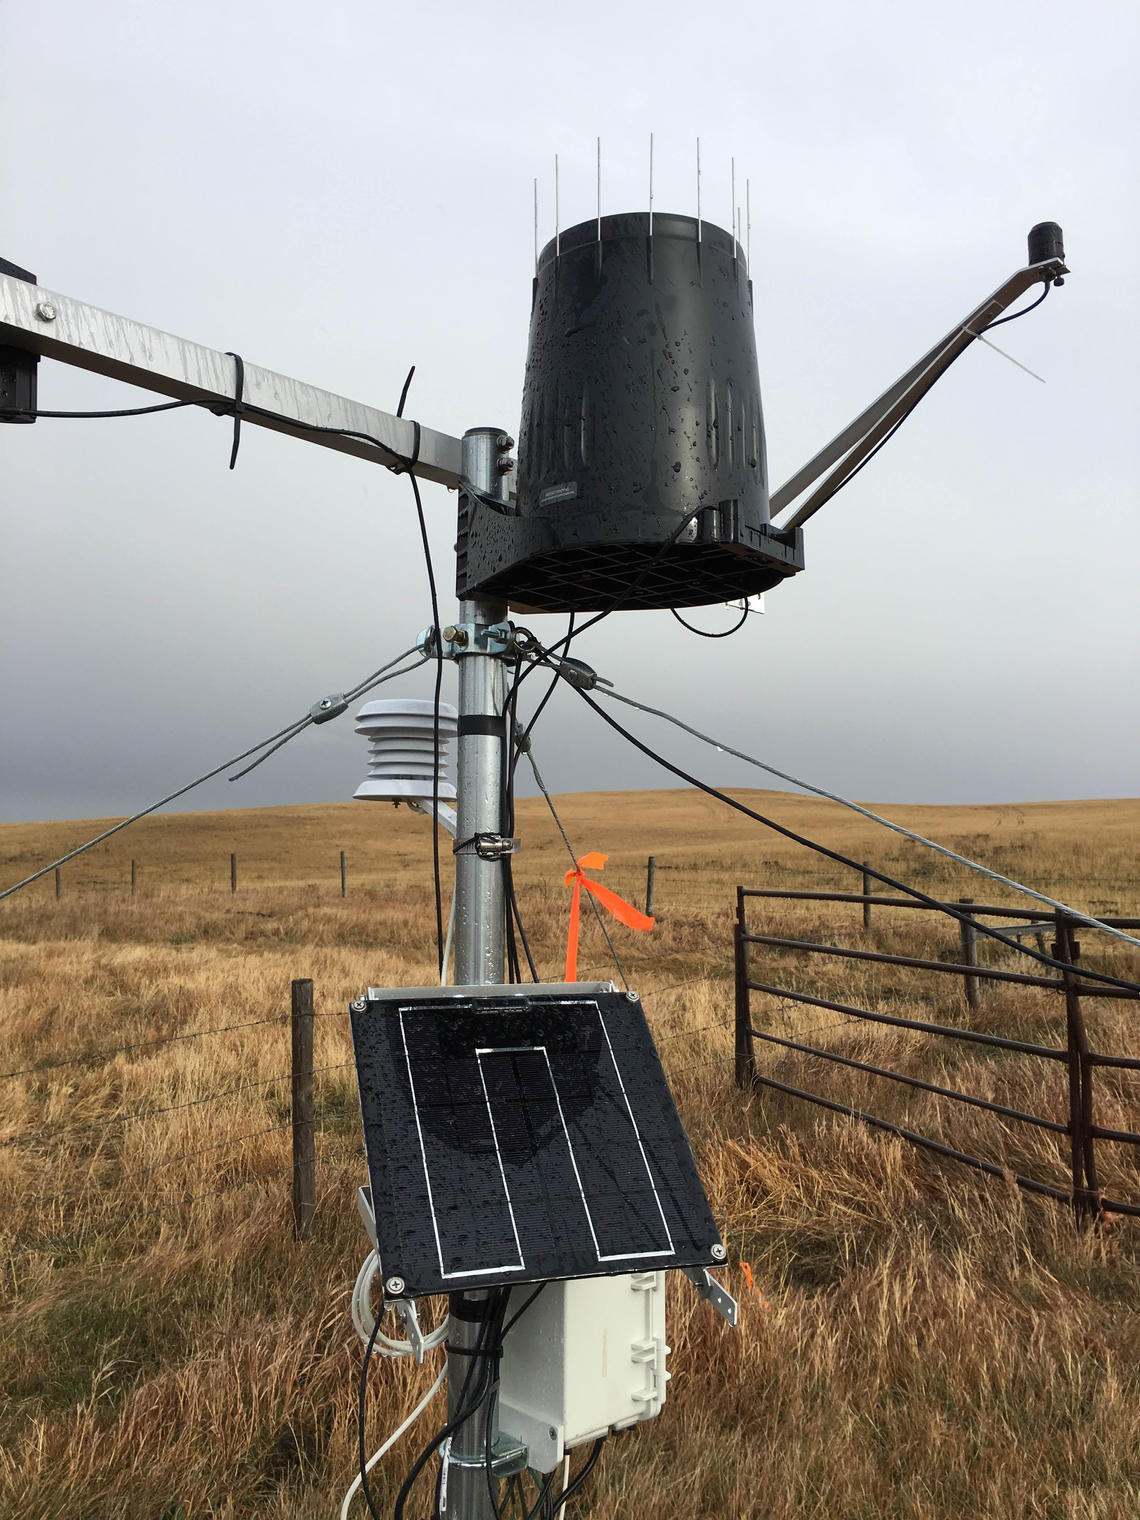 Field weather stations will help collect data as part of the three-year study.